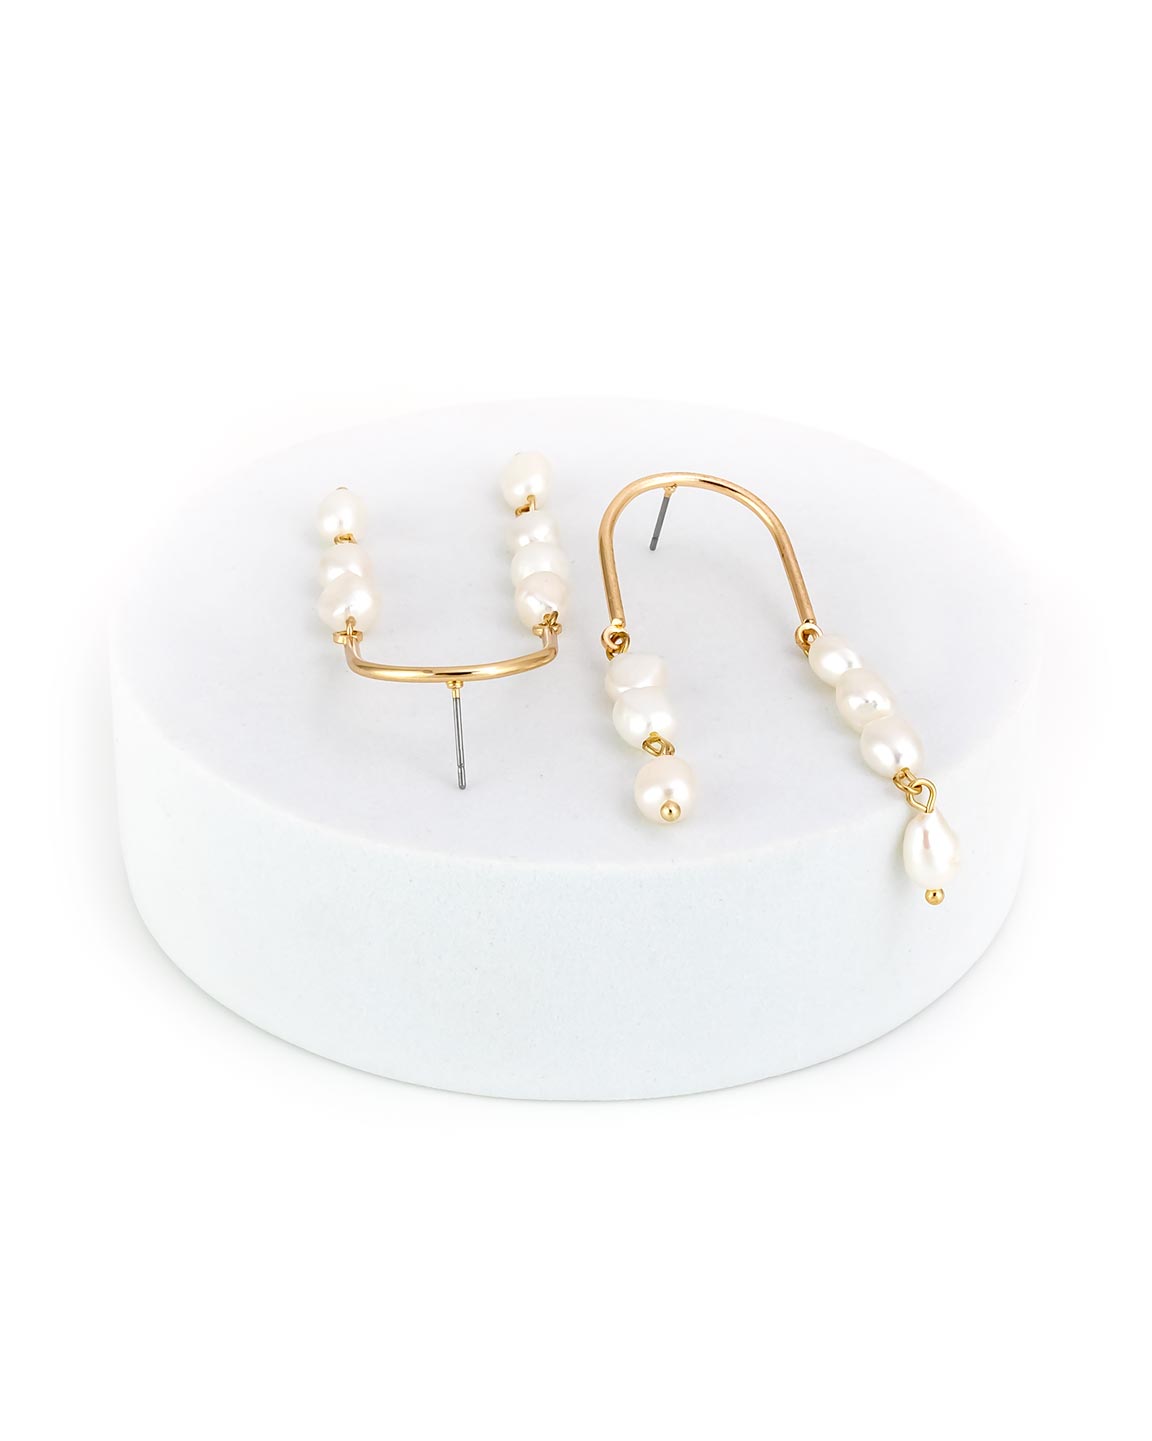 Dauplaise Jewelry - Arch Pearl Statement Earrings